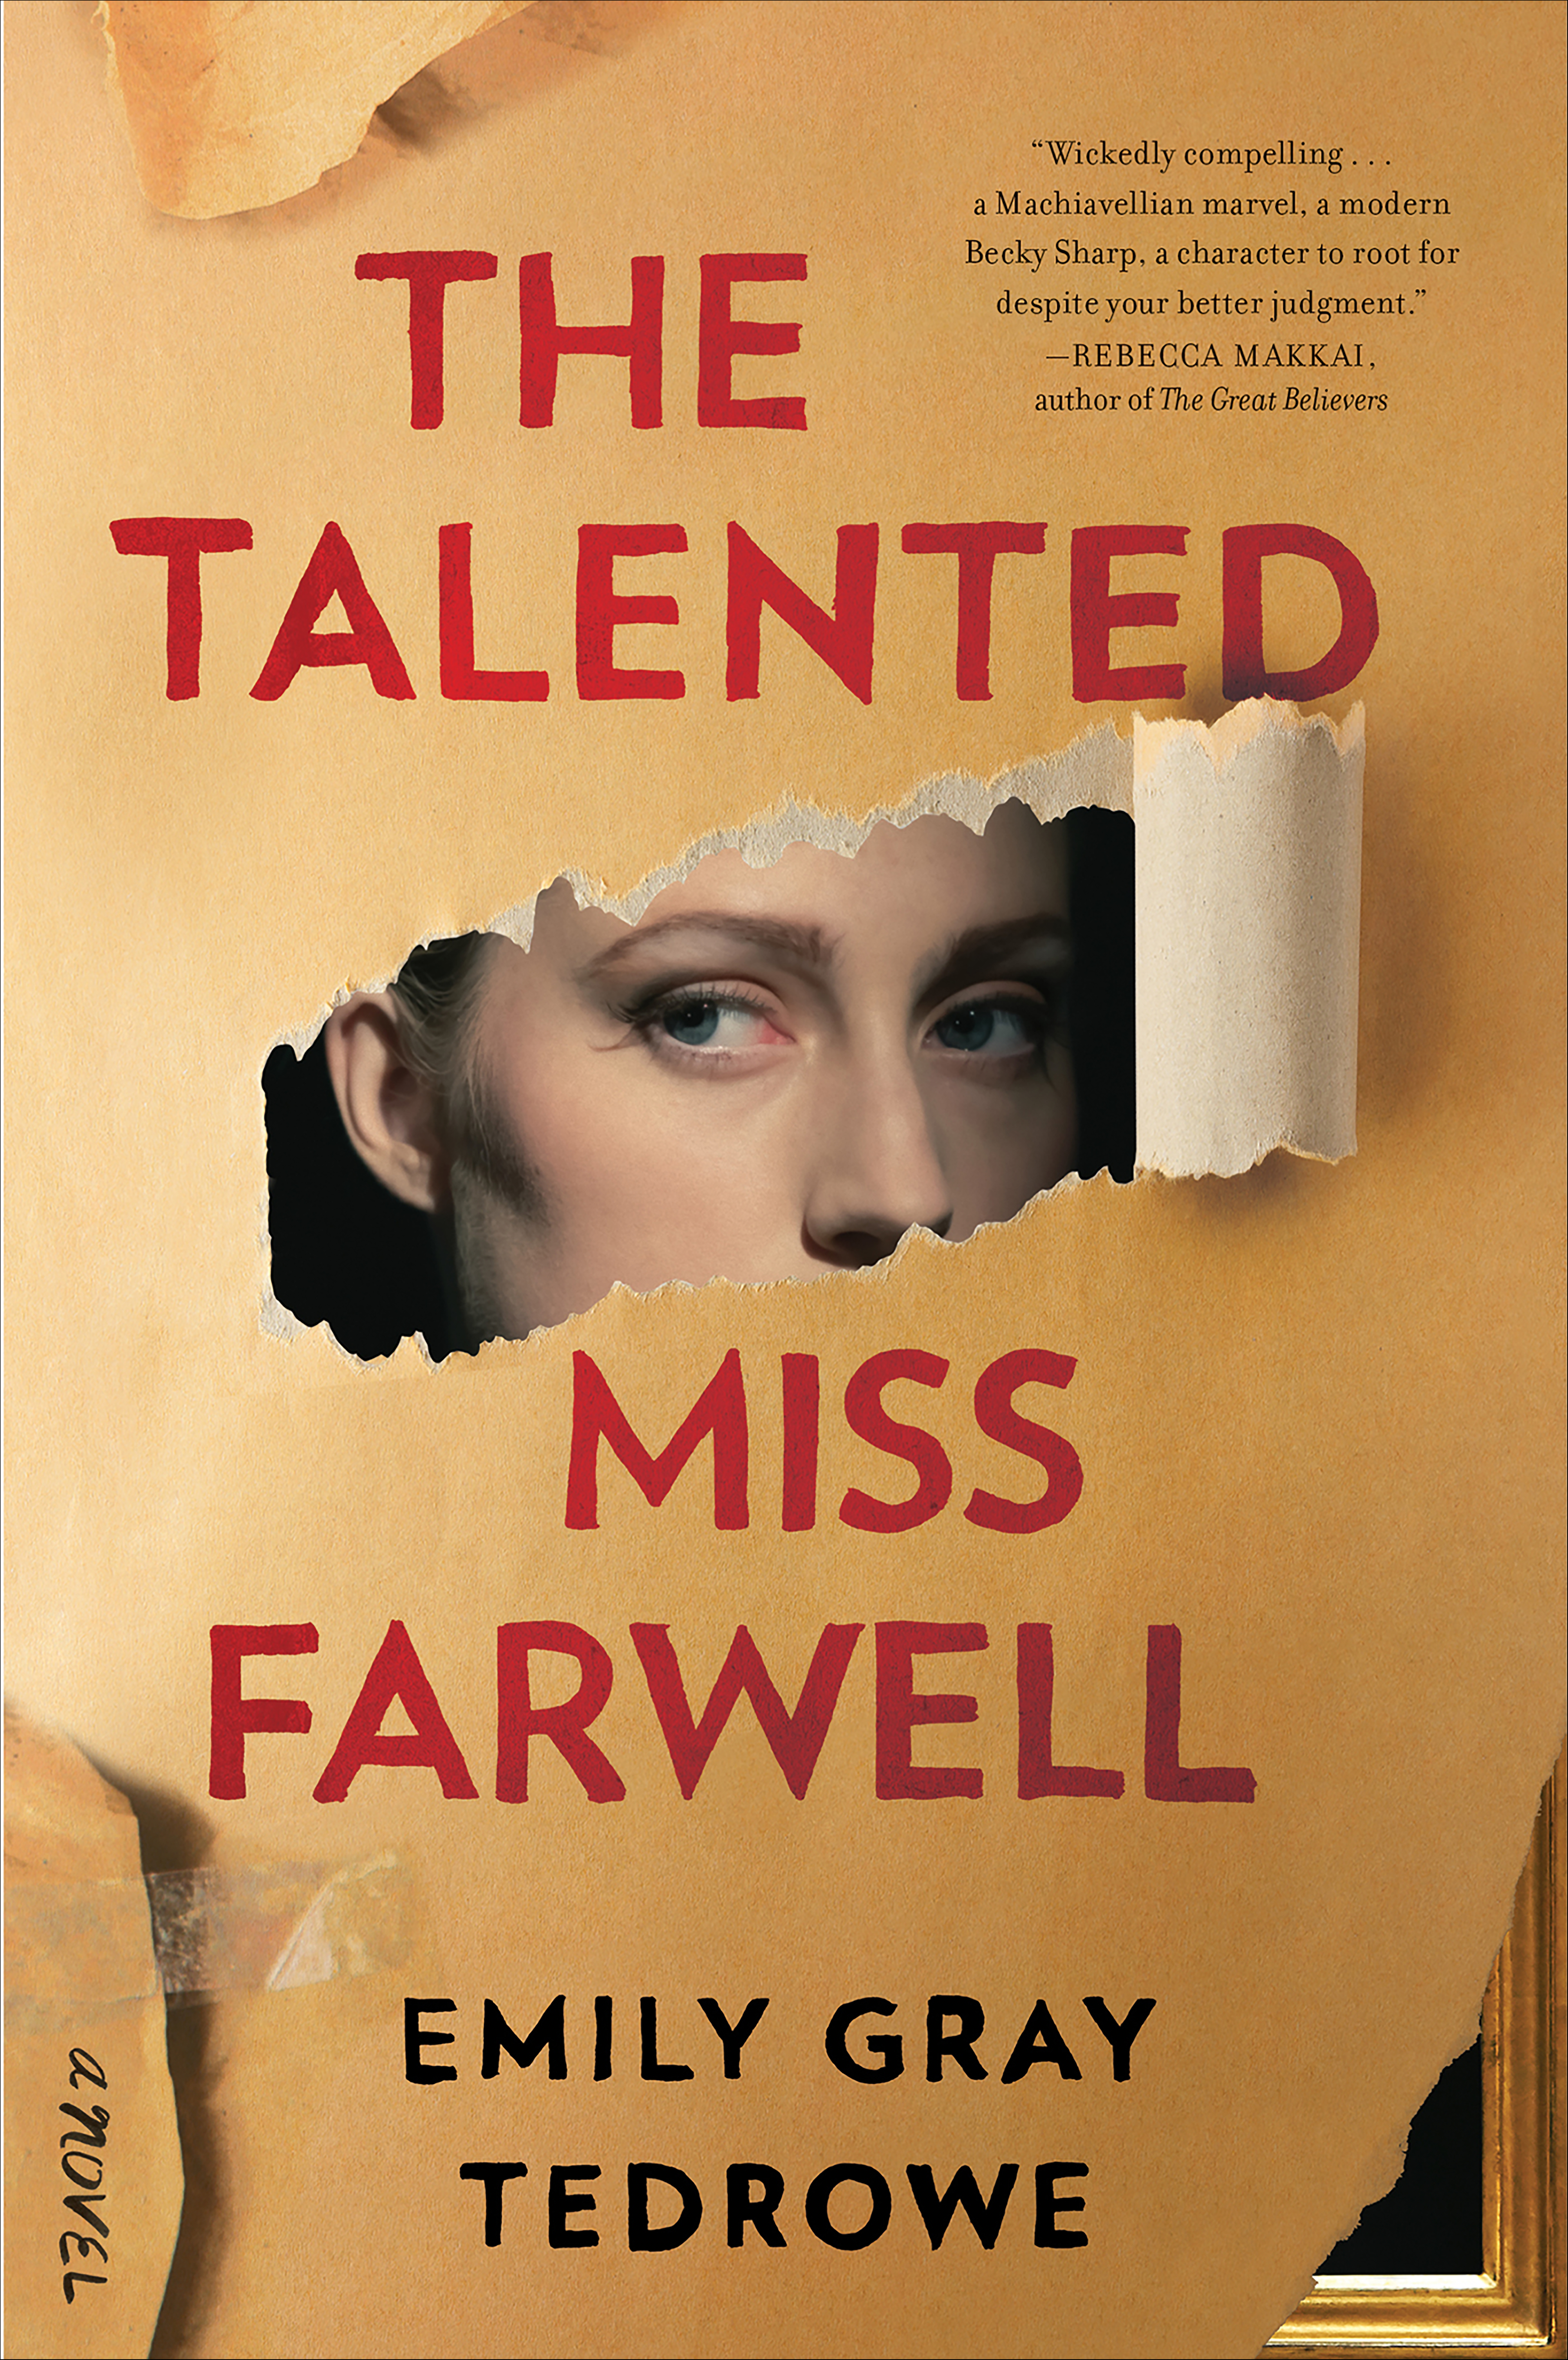 The talented Miss Farwell cover image